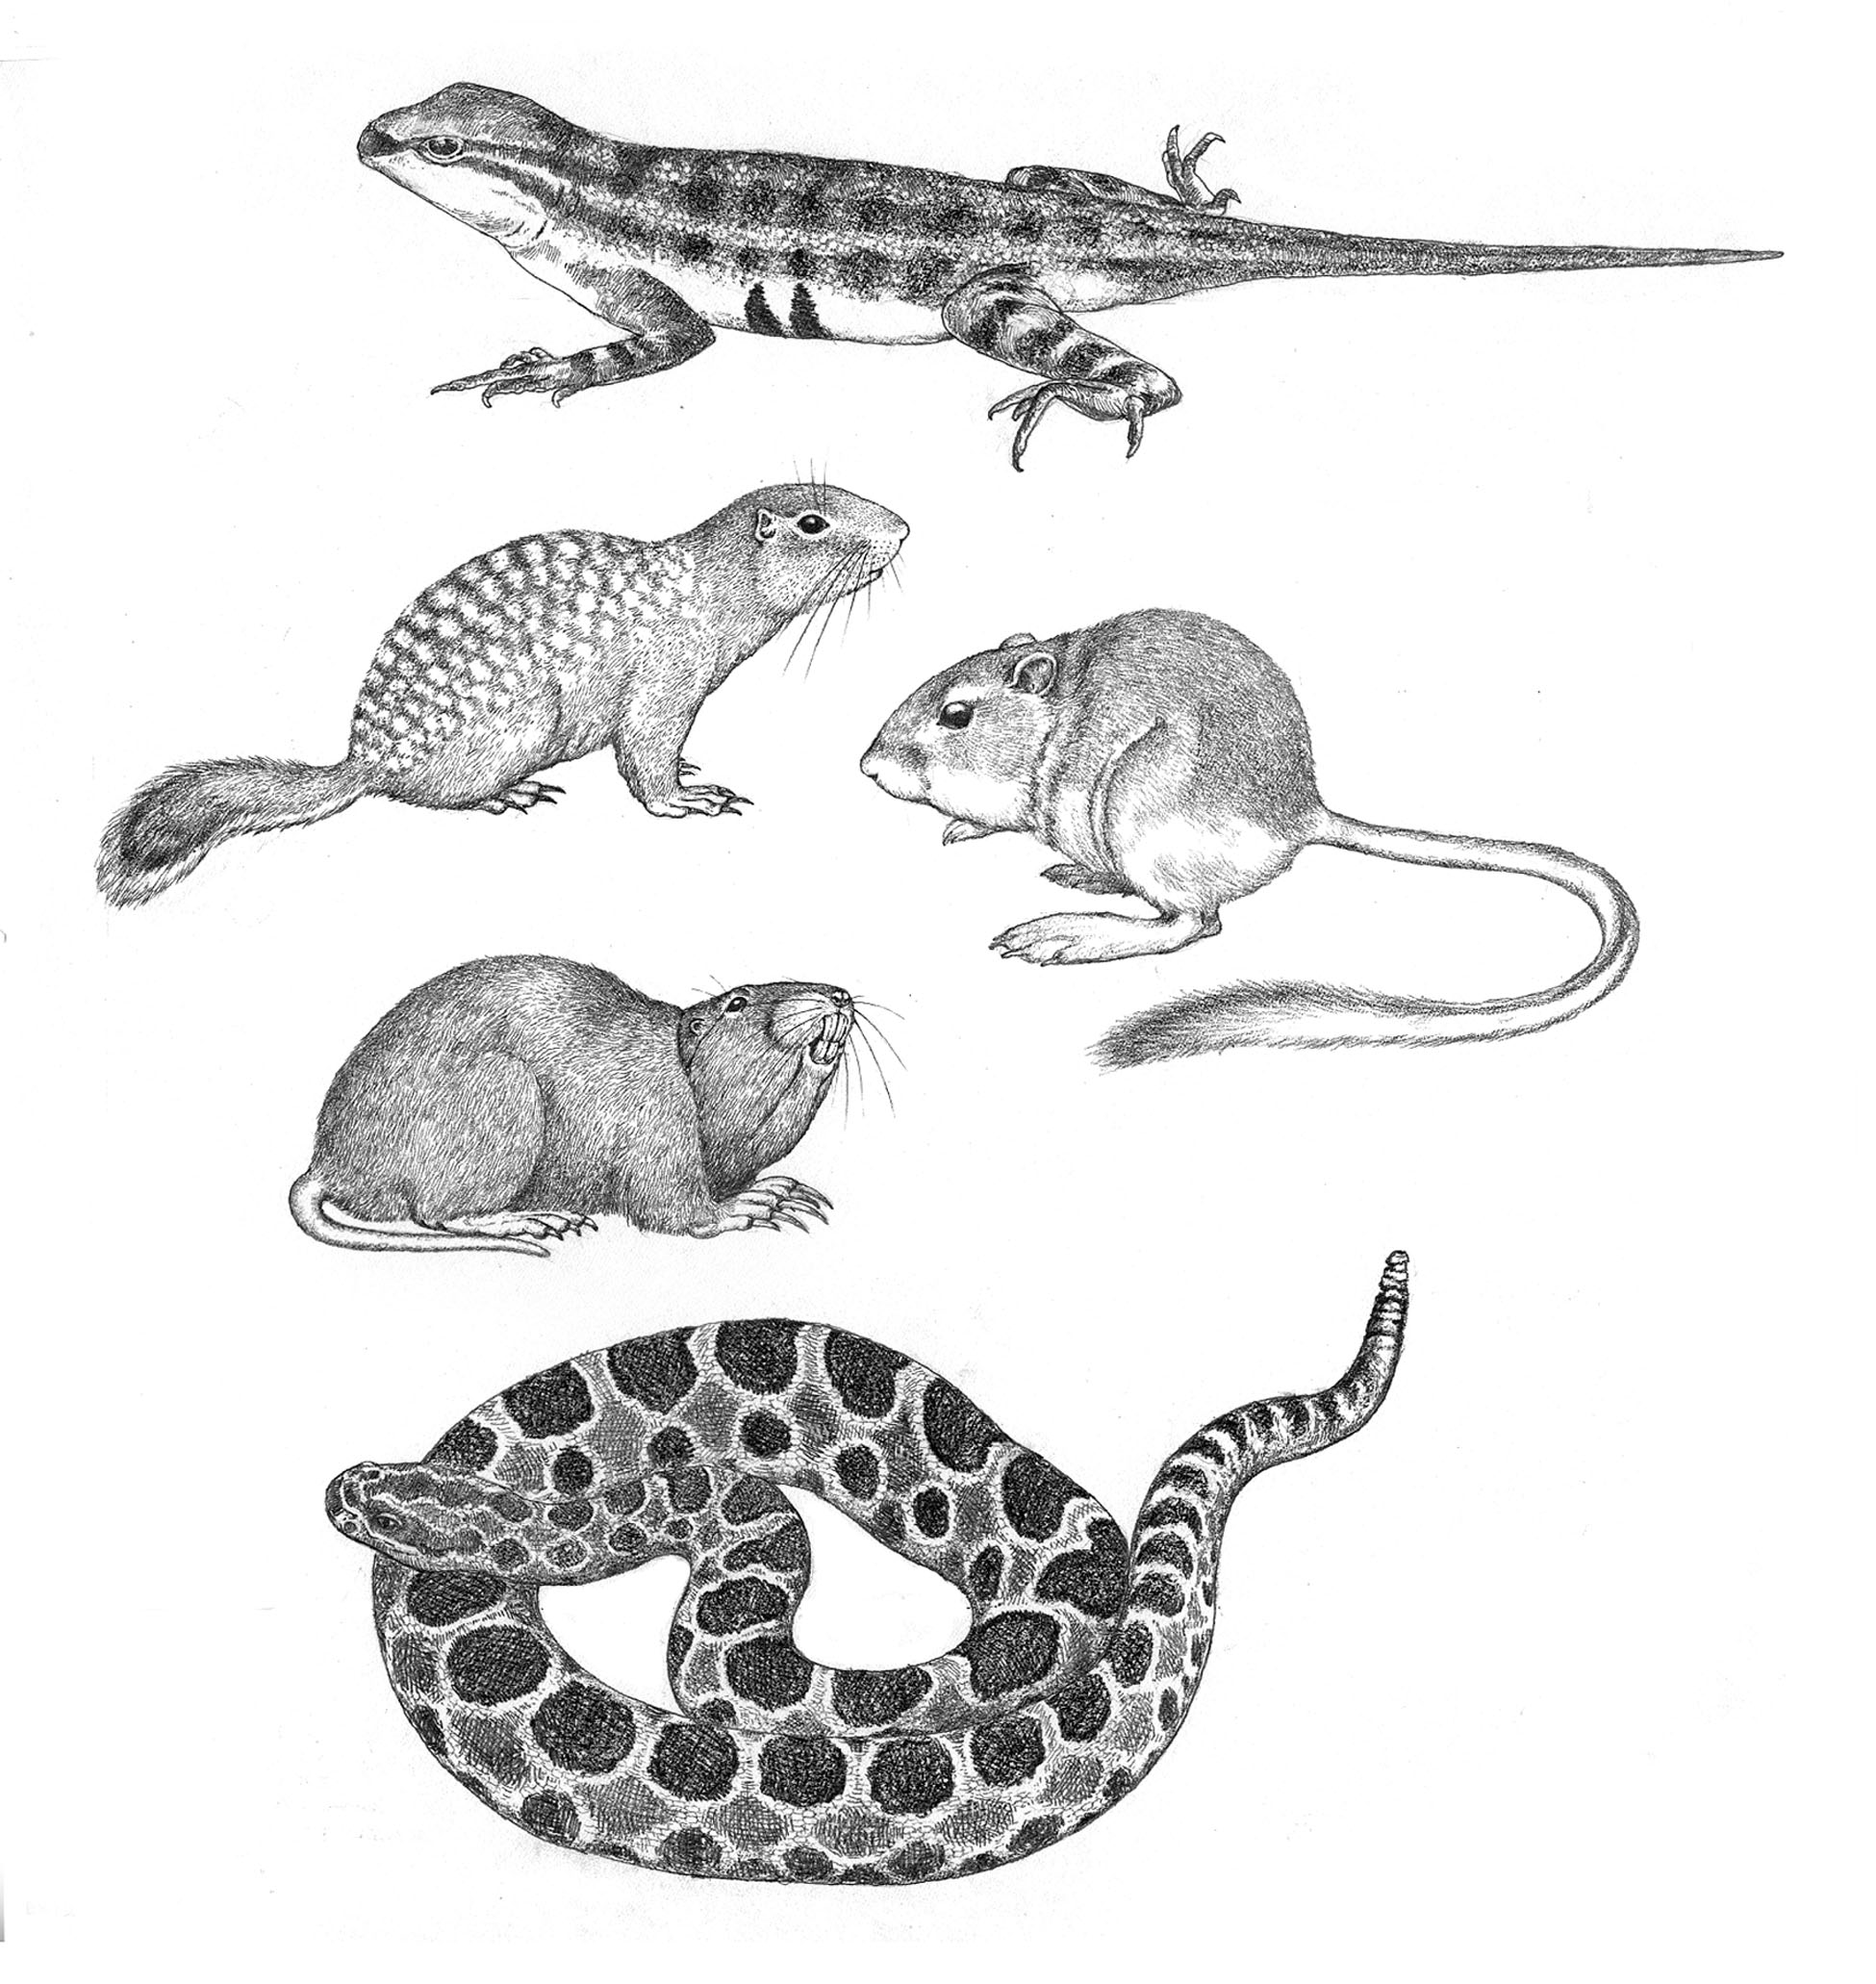 Spot illustrations of a Keeled earless lizard, a Spotted ground squirrel, a Texas kangaroo rat, a South Texas pocket gopher, and a Western massasauga rattlesnake.